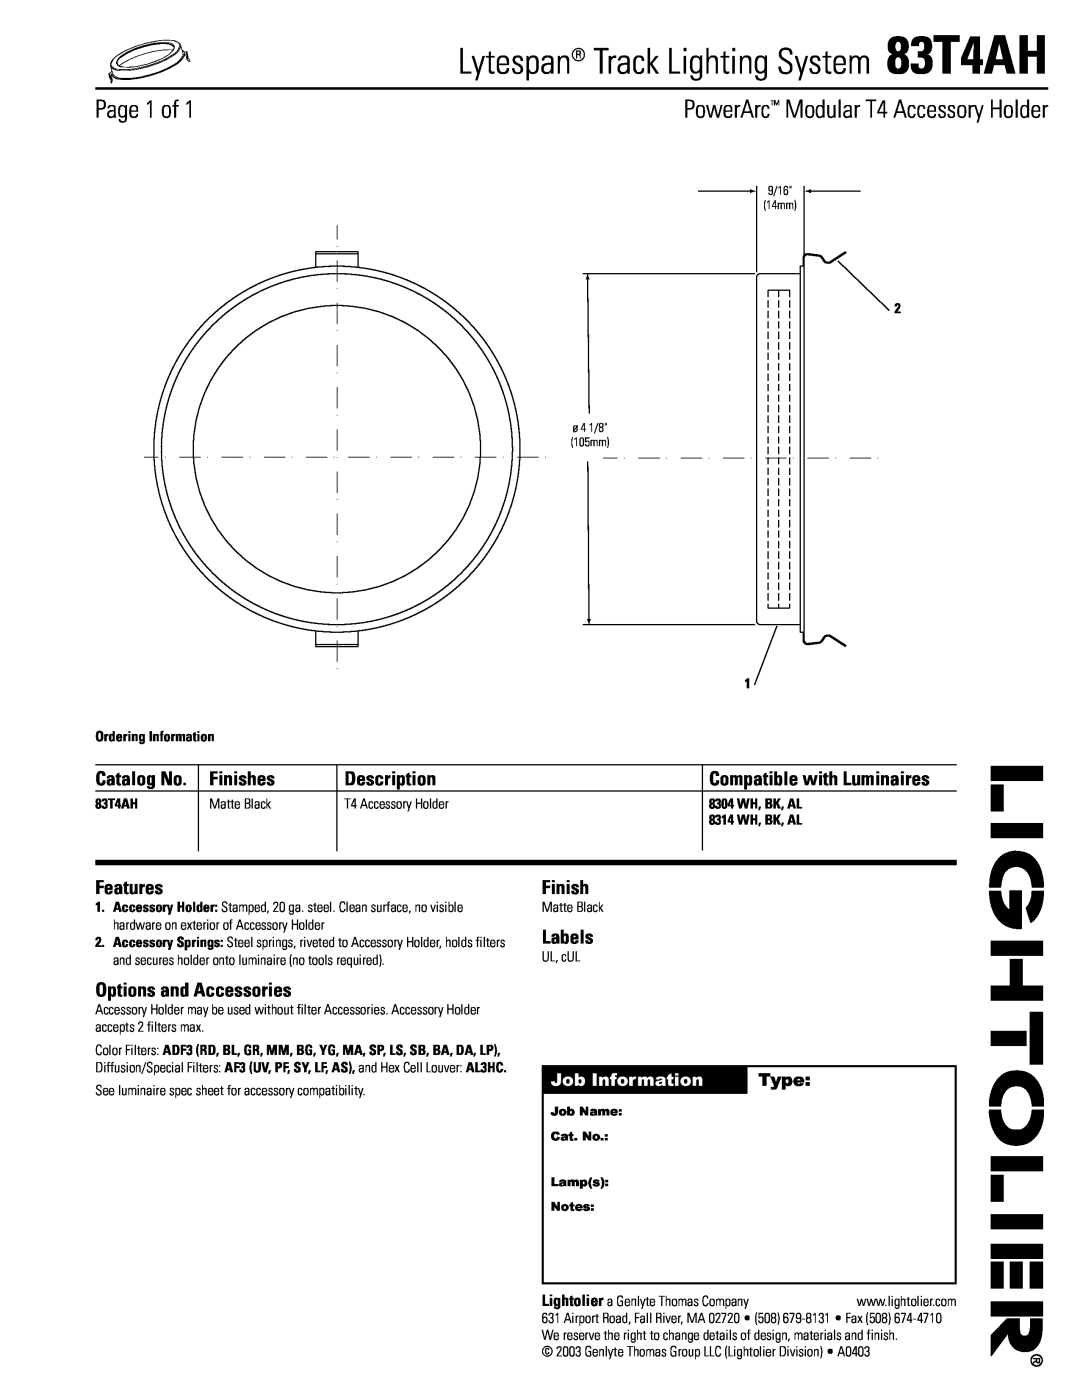 Lightolier manual Lytespan Track Lighting System 83T4AH, Page 1 of, PowerArc Modular T4 Accessory Holder, Finishes 